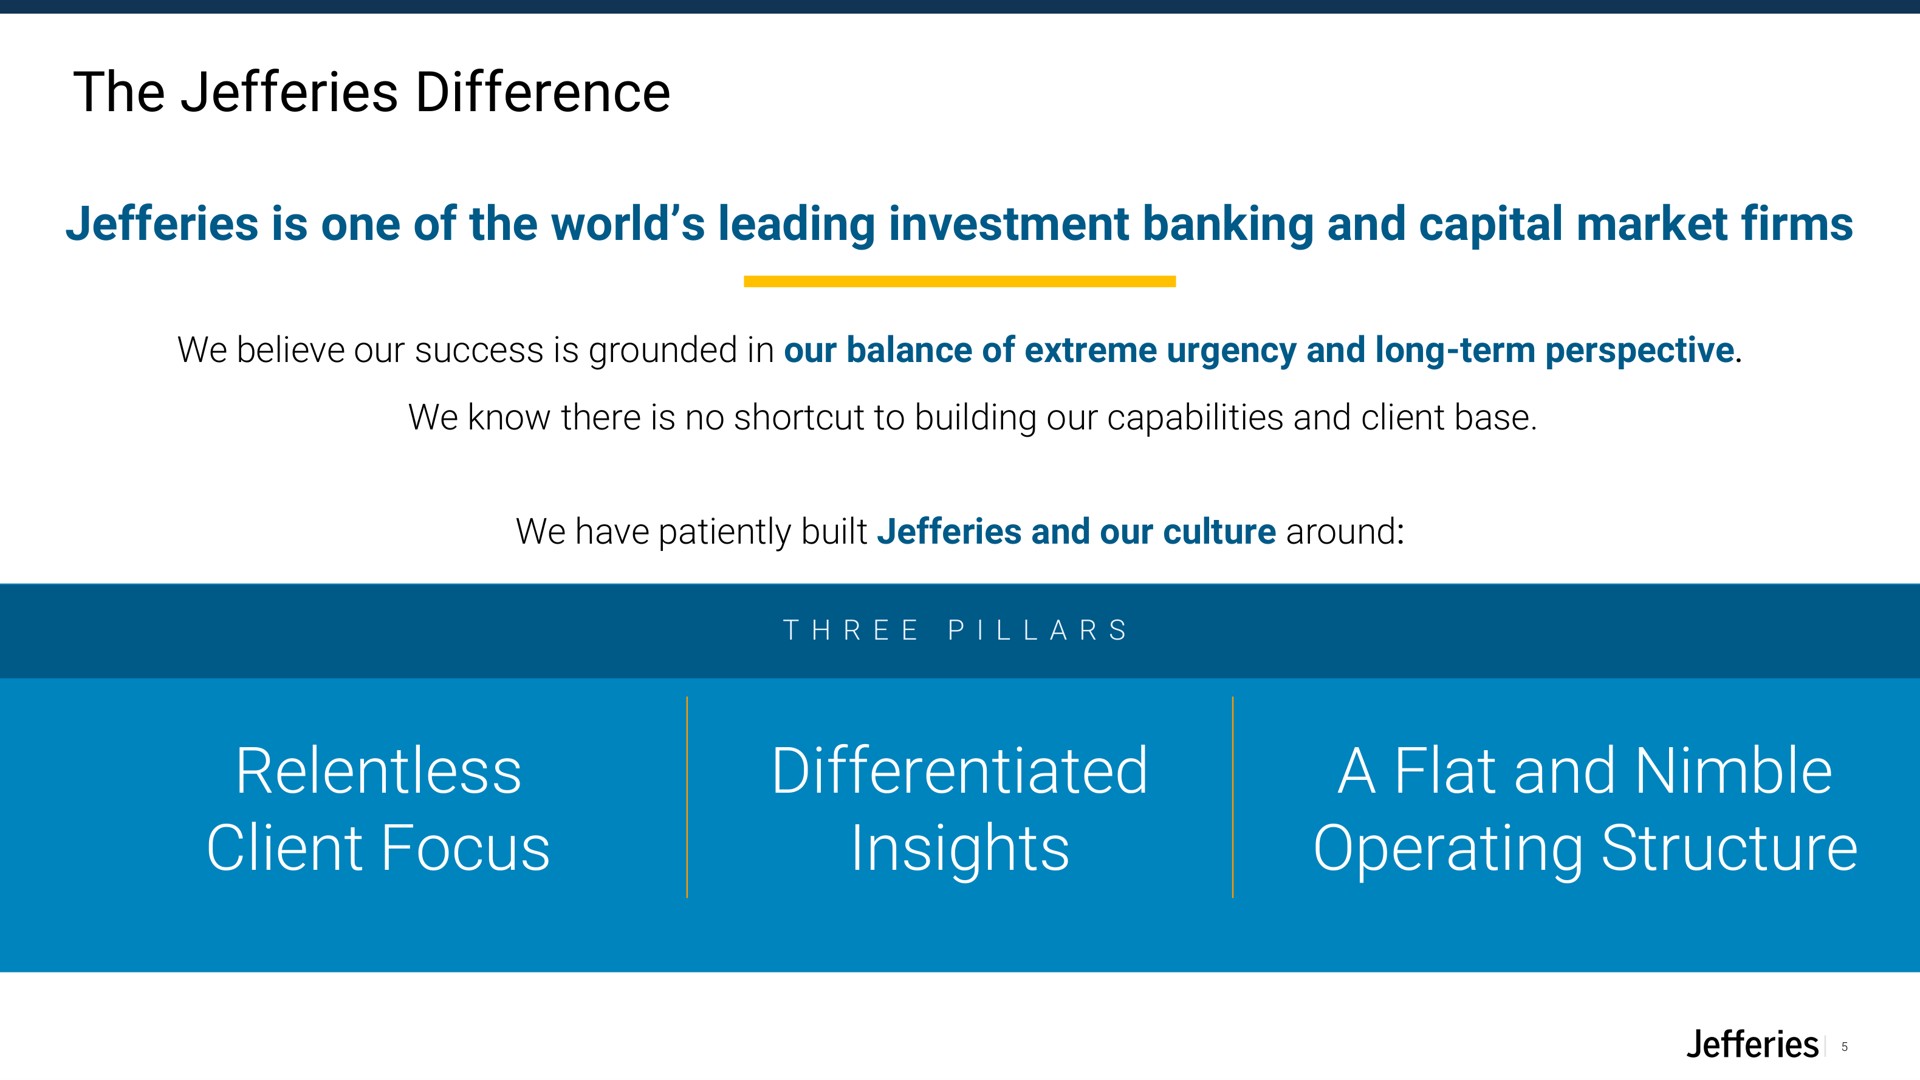 the difference is one of the world leading investment banking and capital market firms relentless client focus differentiated insights a flat and nimble operating structure | Jefferies Financial Group